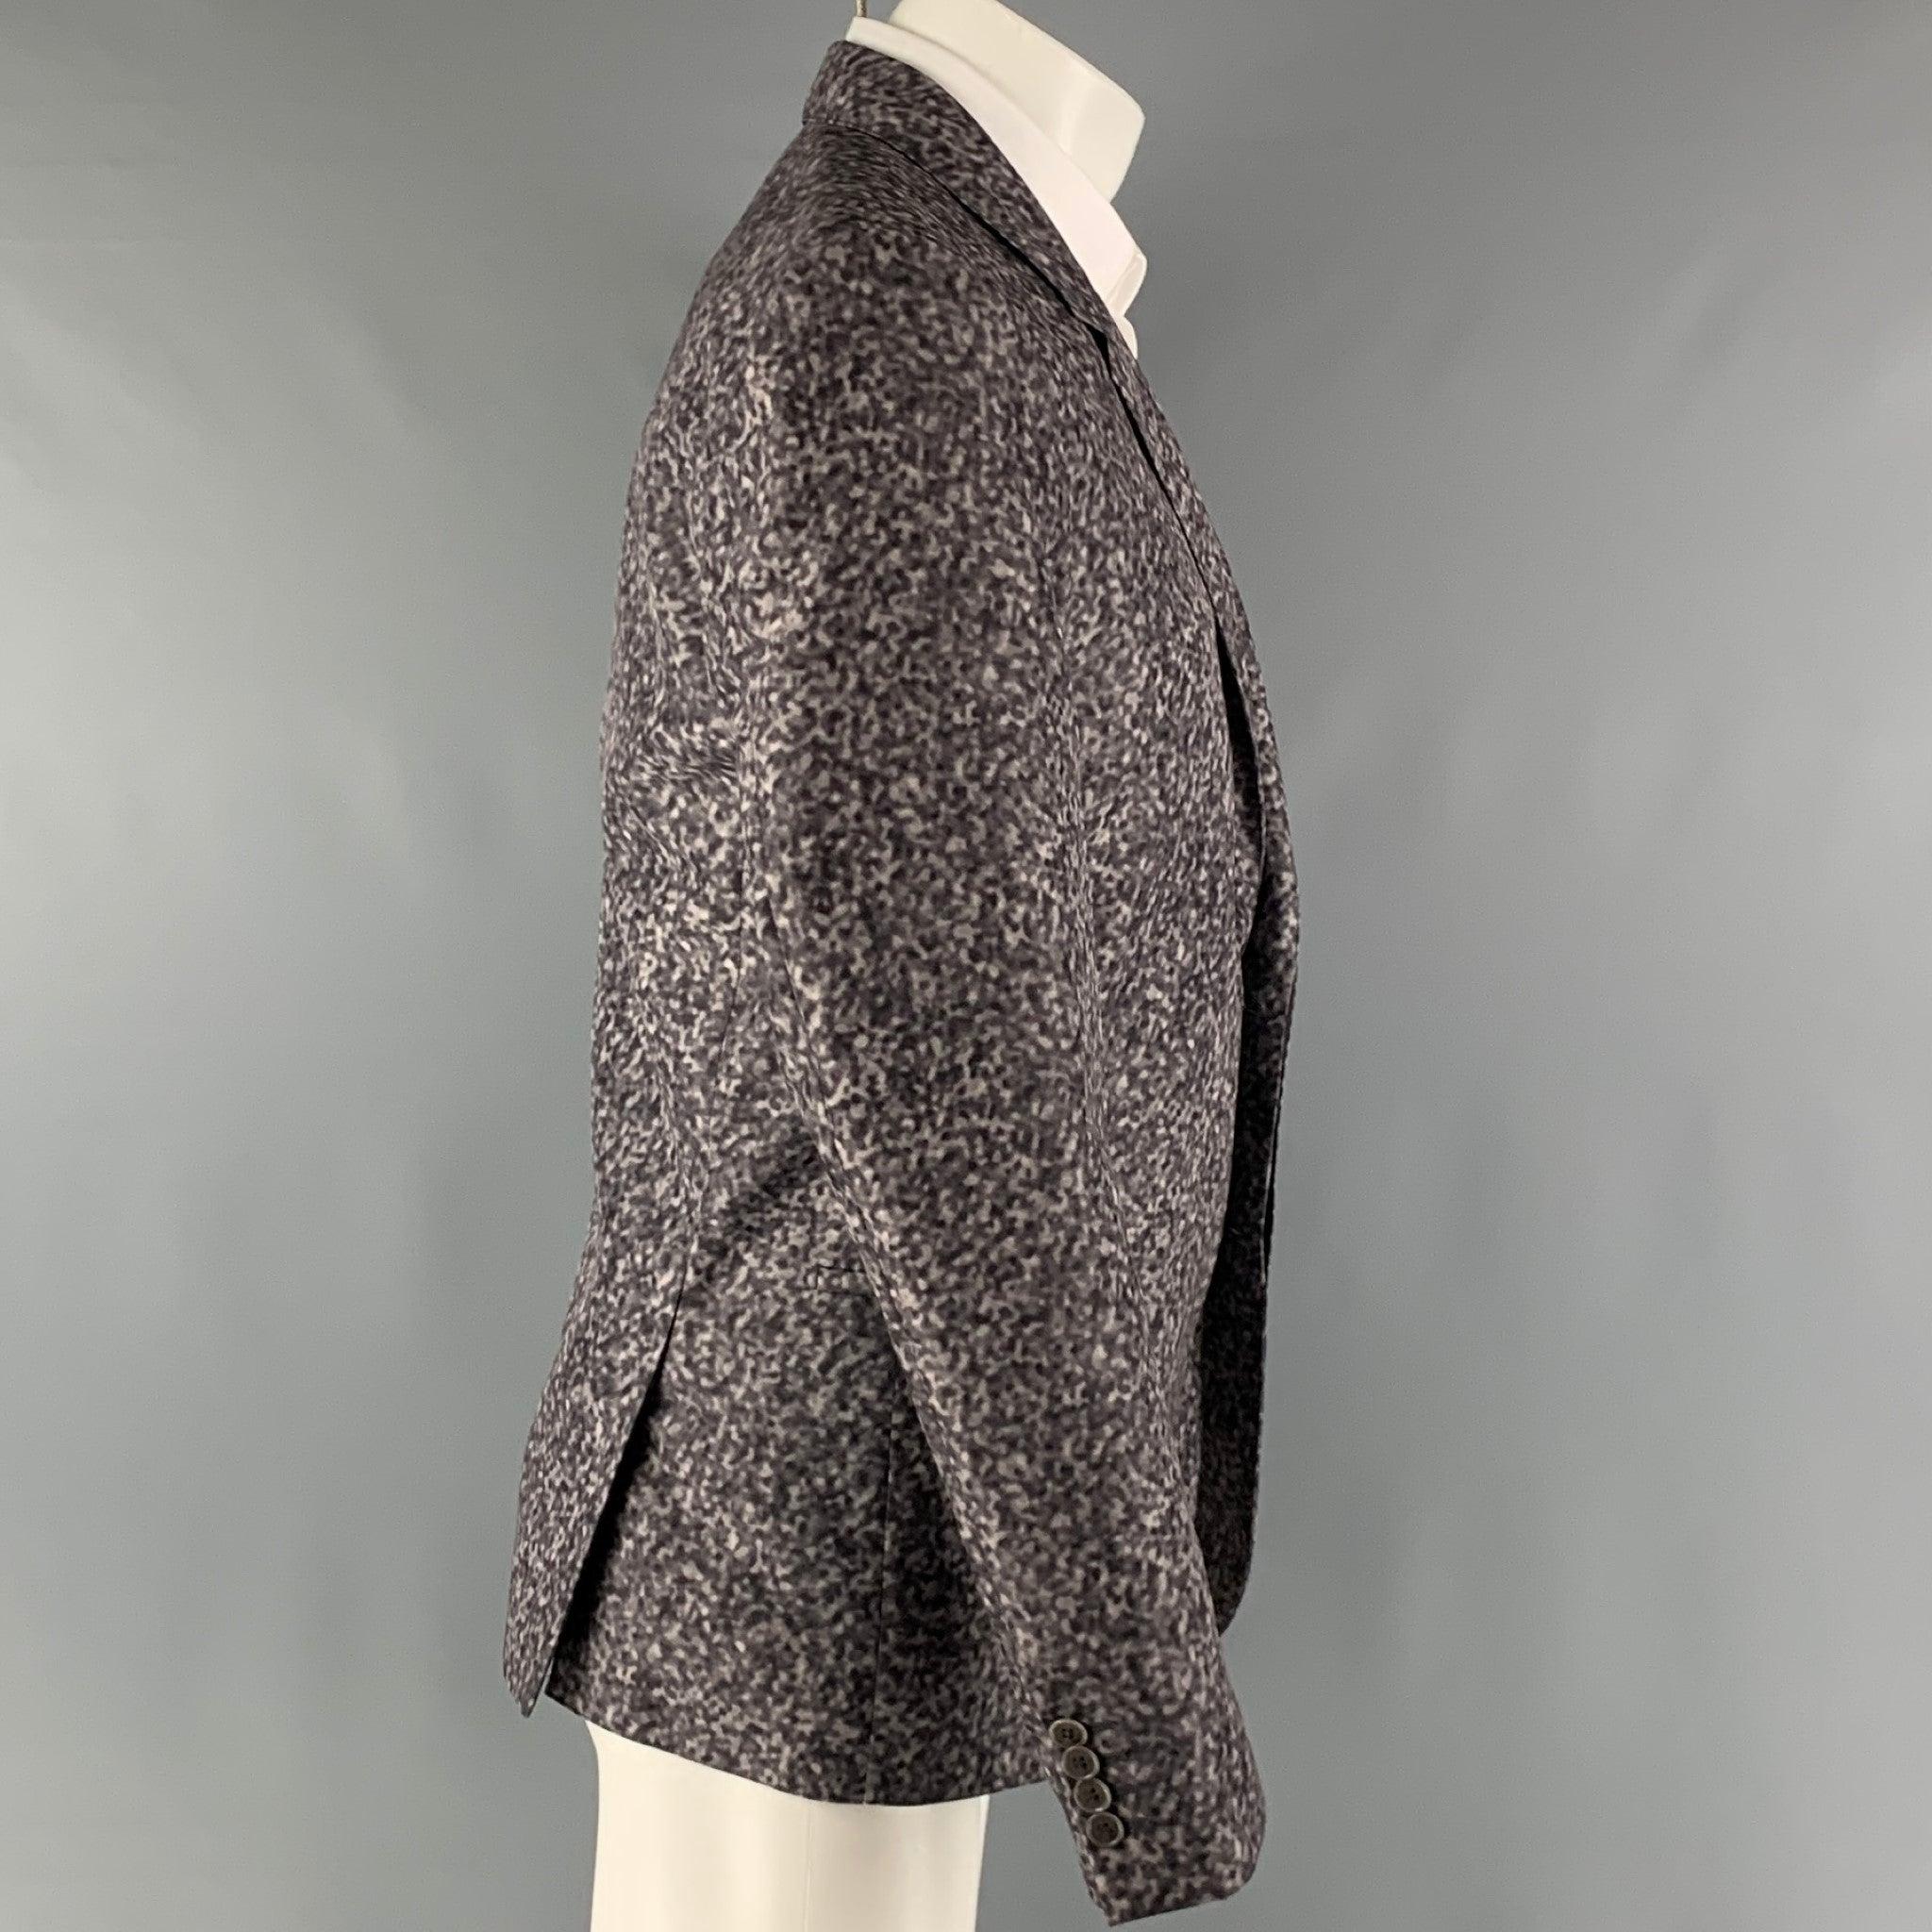 CALVIN KLEIN COLLECTION sport coat comes in a gray abstract print polyester woven material with a full liner and includes a single breasted, single button hidden closure, notch lapel and double back vent. Excellent Pre-Owned Condition. 

Marked:  